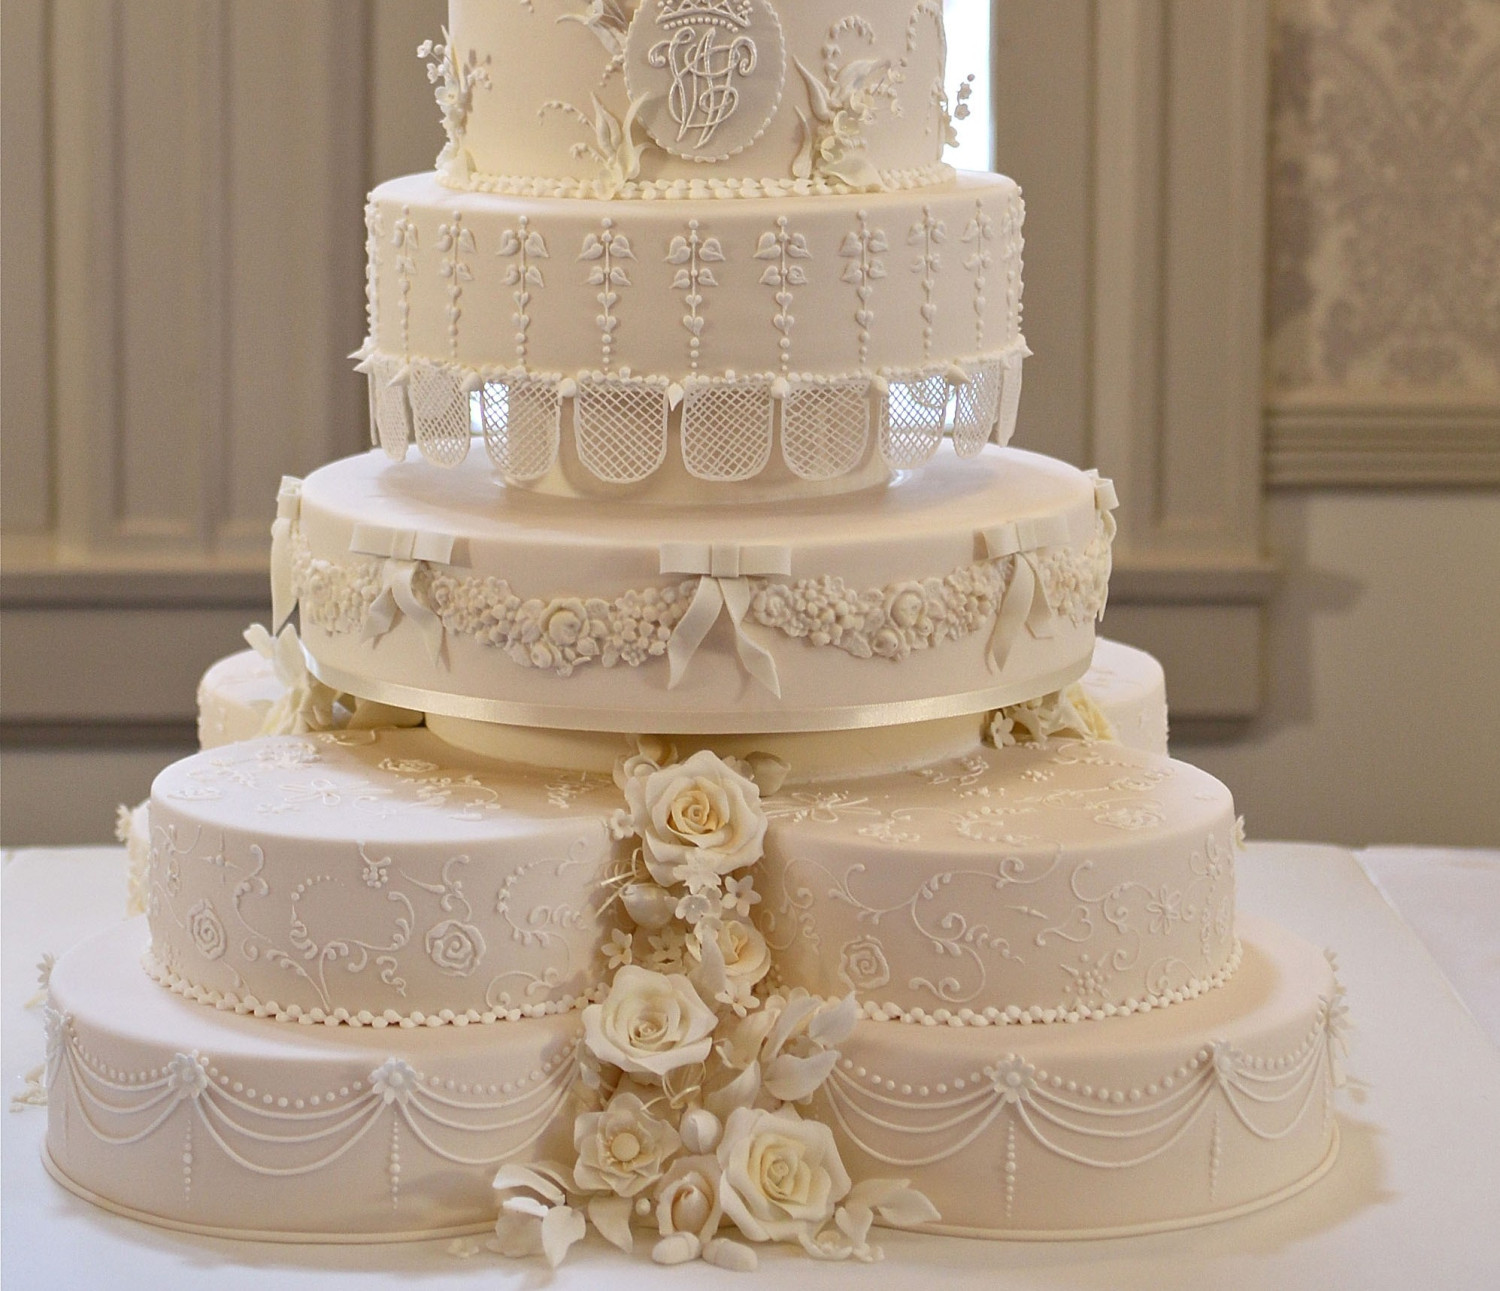 Tampa Wedding Cakes
 Best Places For Wedding Cakes In Tampa Bay CBS Tampa